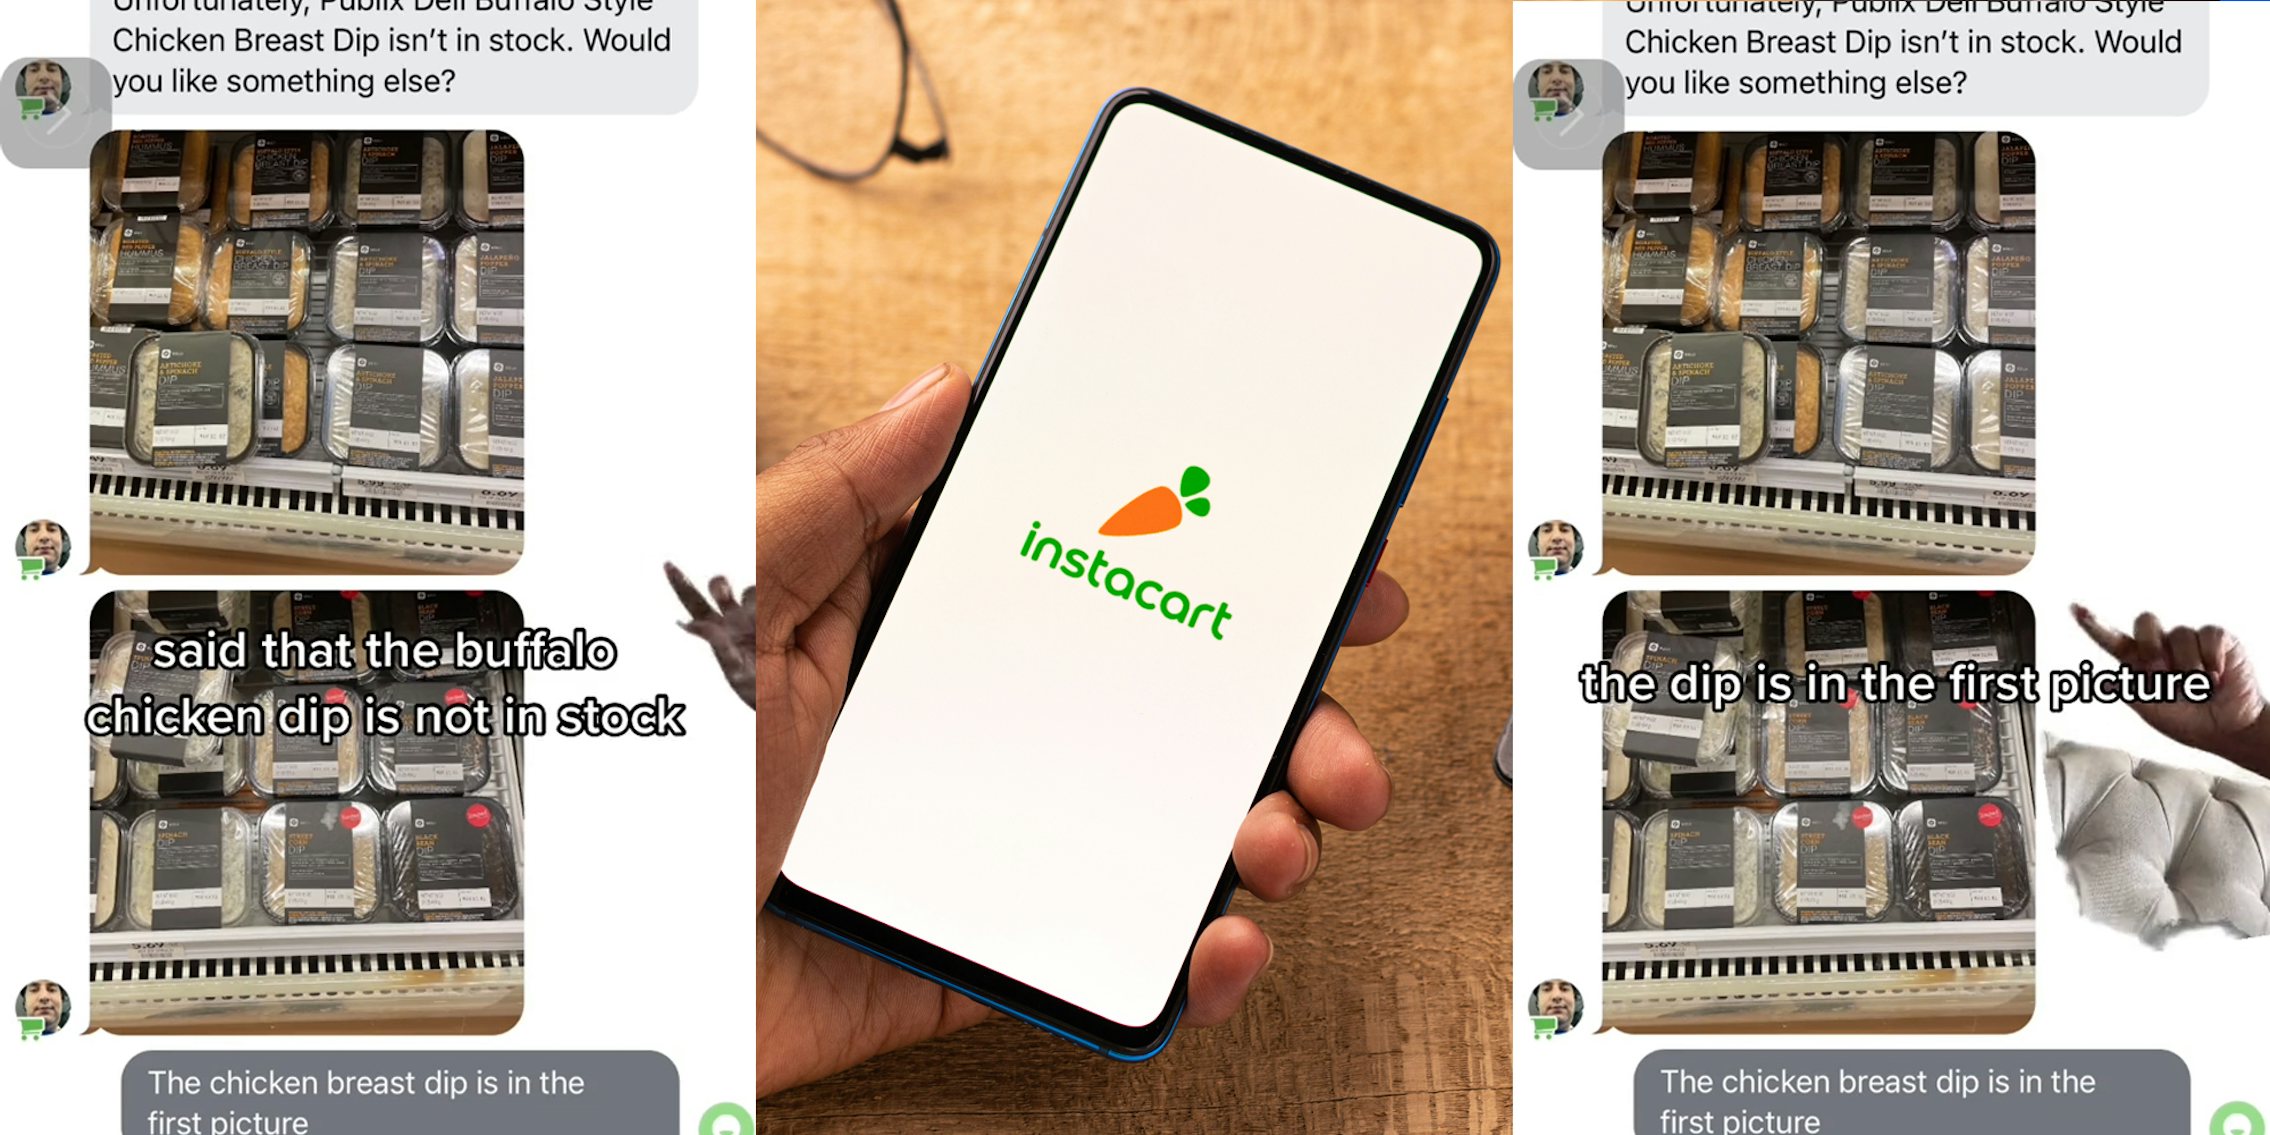 hand greenscreen TikTok over messages between them and Instacart shopper with caption 'said that the buffalo chicken dip is not in stock' (l) hand holding phone with Instacart on screen in front of tan background (c) hand greenscreen TikTok over messages between them and Instacart shopper with caption 'the dip is in the first picture' (r)